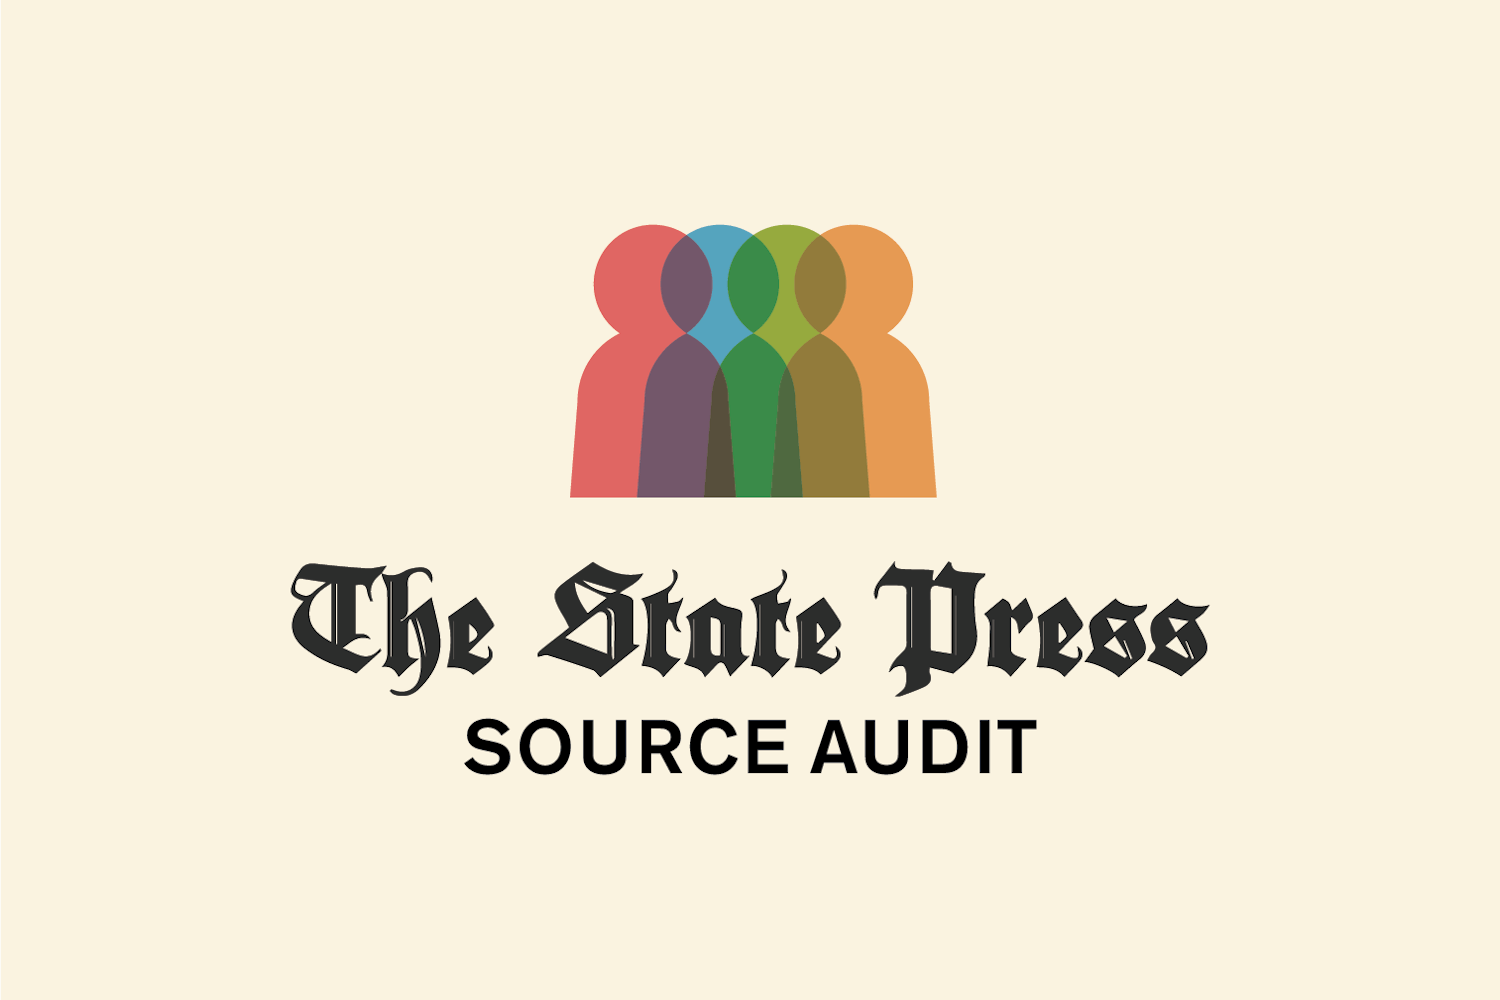 A logo of The State Press source audit.